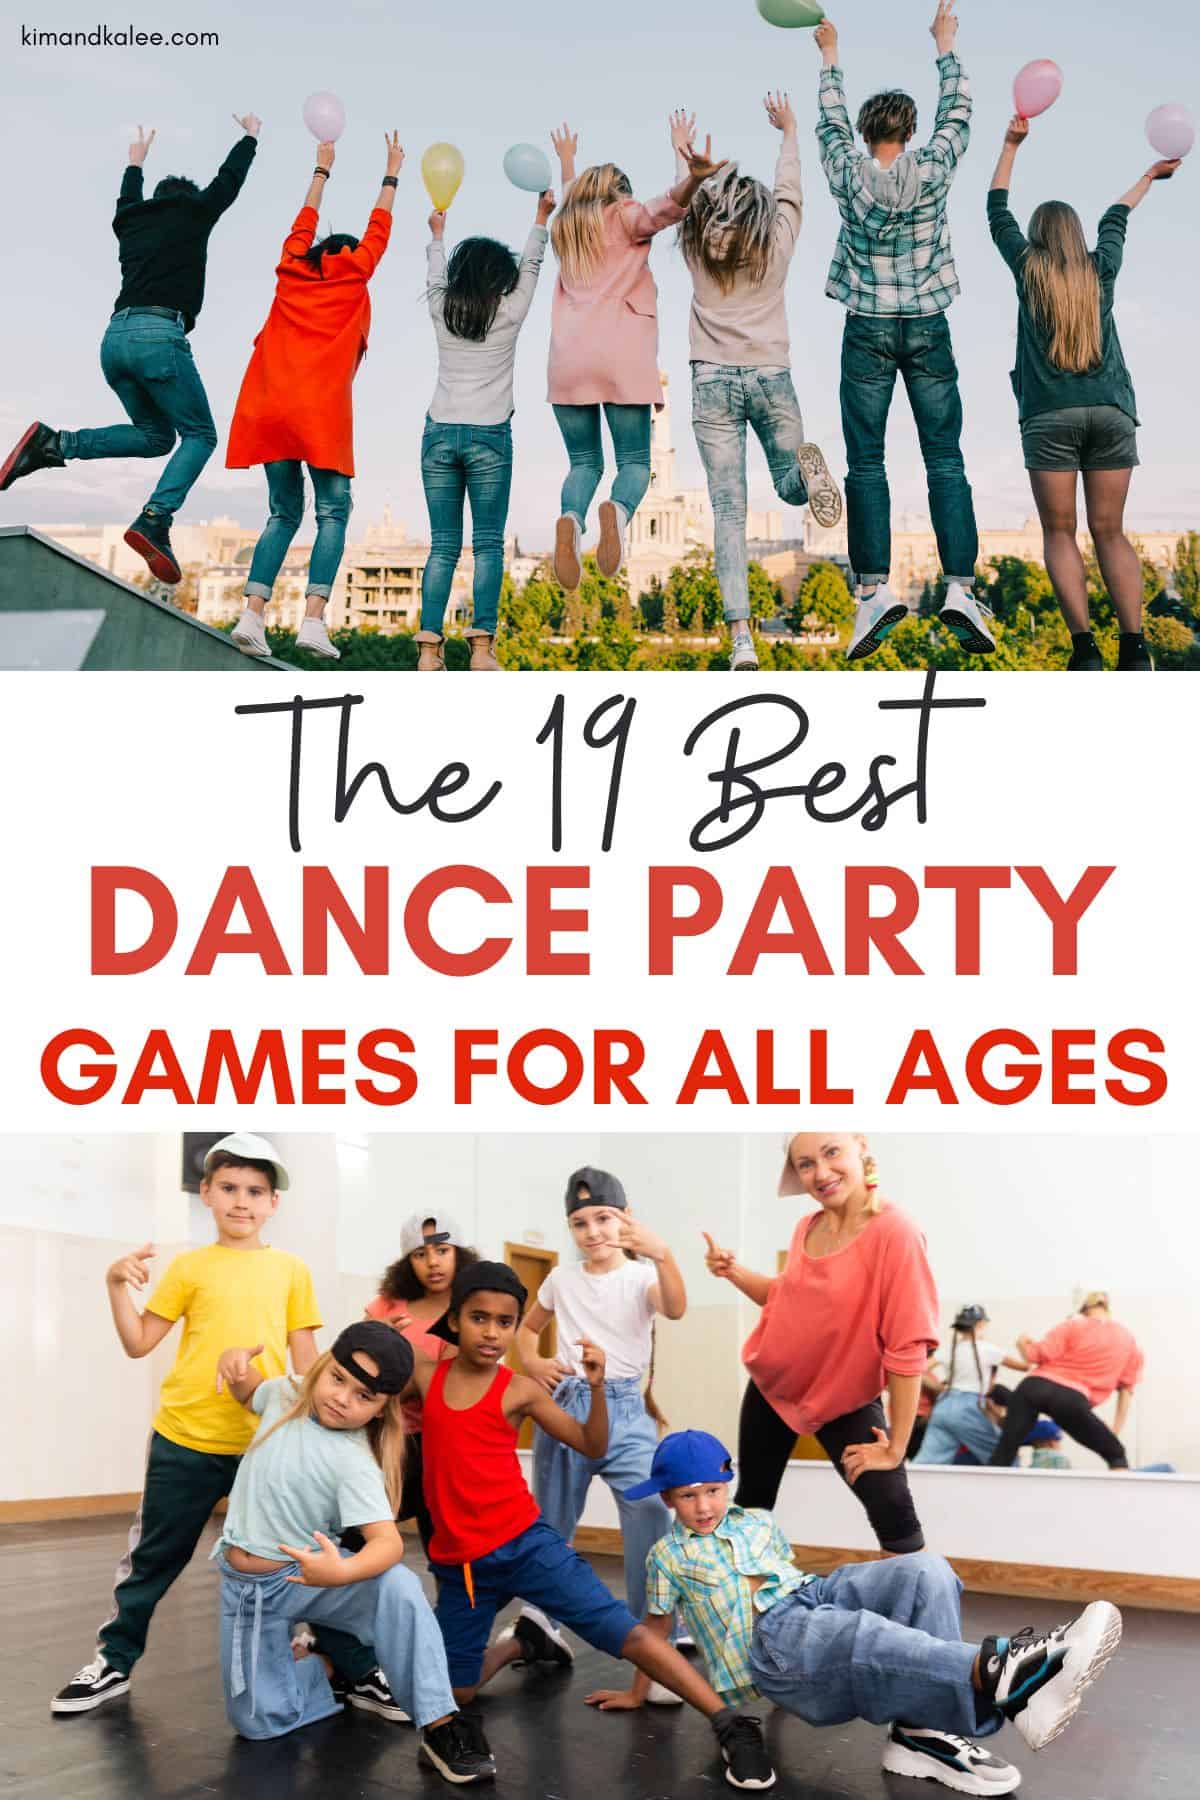 collage of kids of different ages - some teenagers or young adults - text overlay in the middle says the 19 best dance party games for all ages